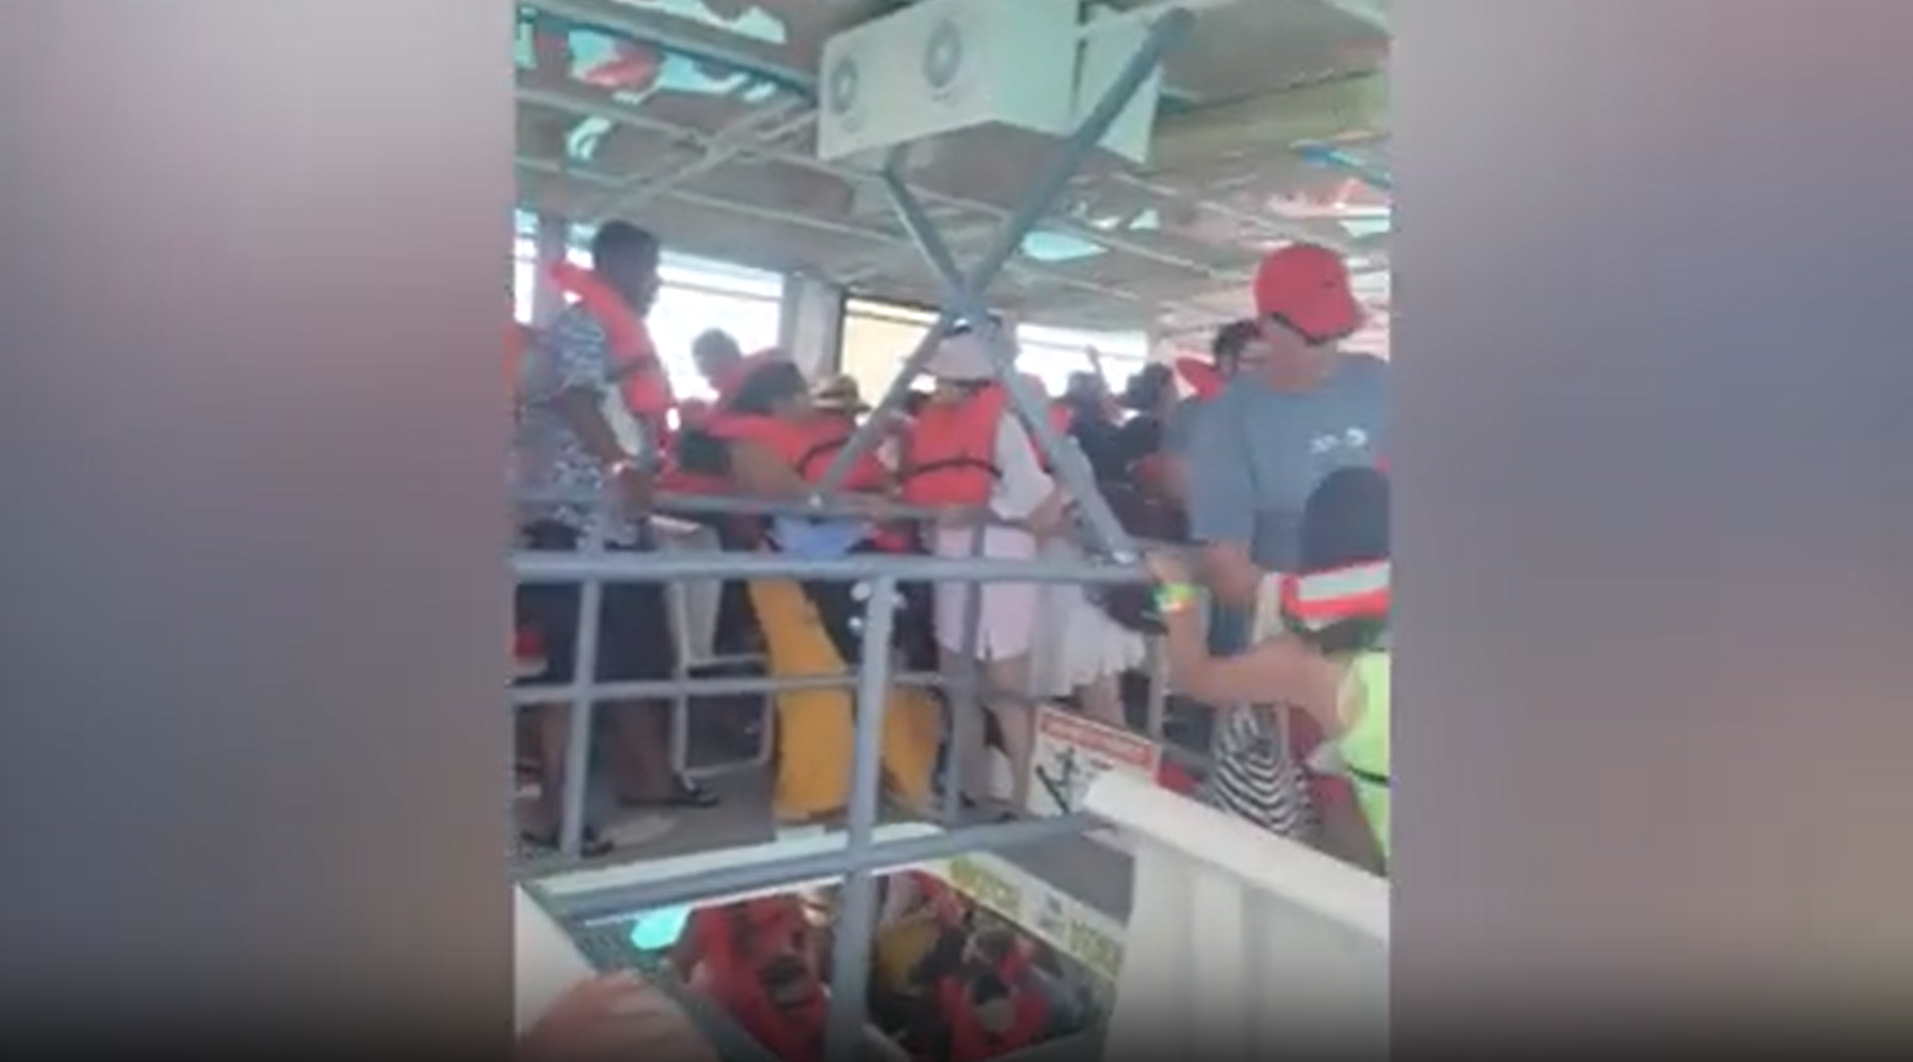 Passengers clung on for dear life as the boat started to sink